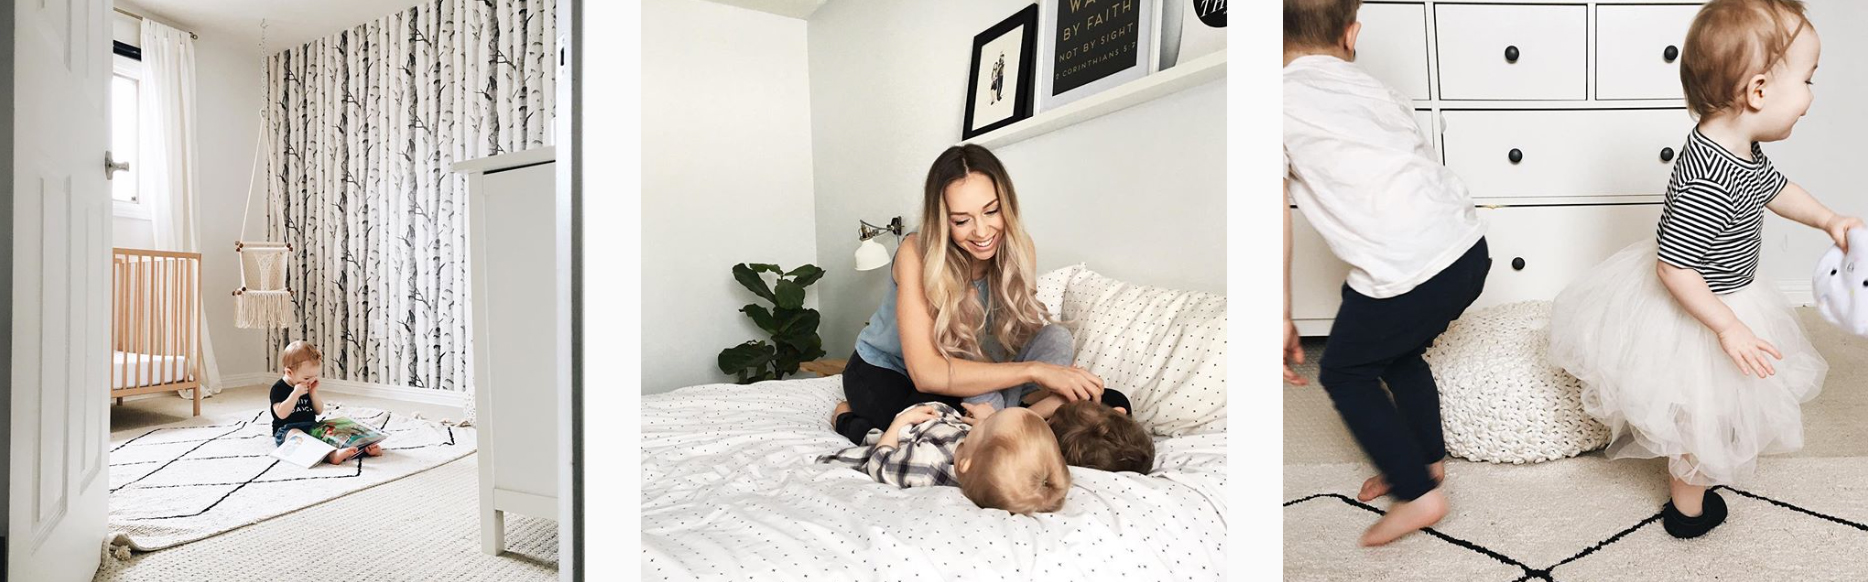 5 Cool Moms to Follow on Instagram - PLANOLY Blog - Mother's Day - Britt Havens